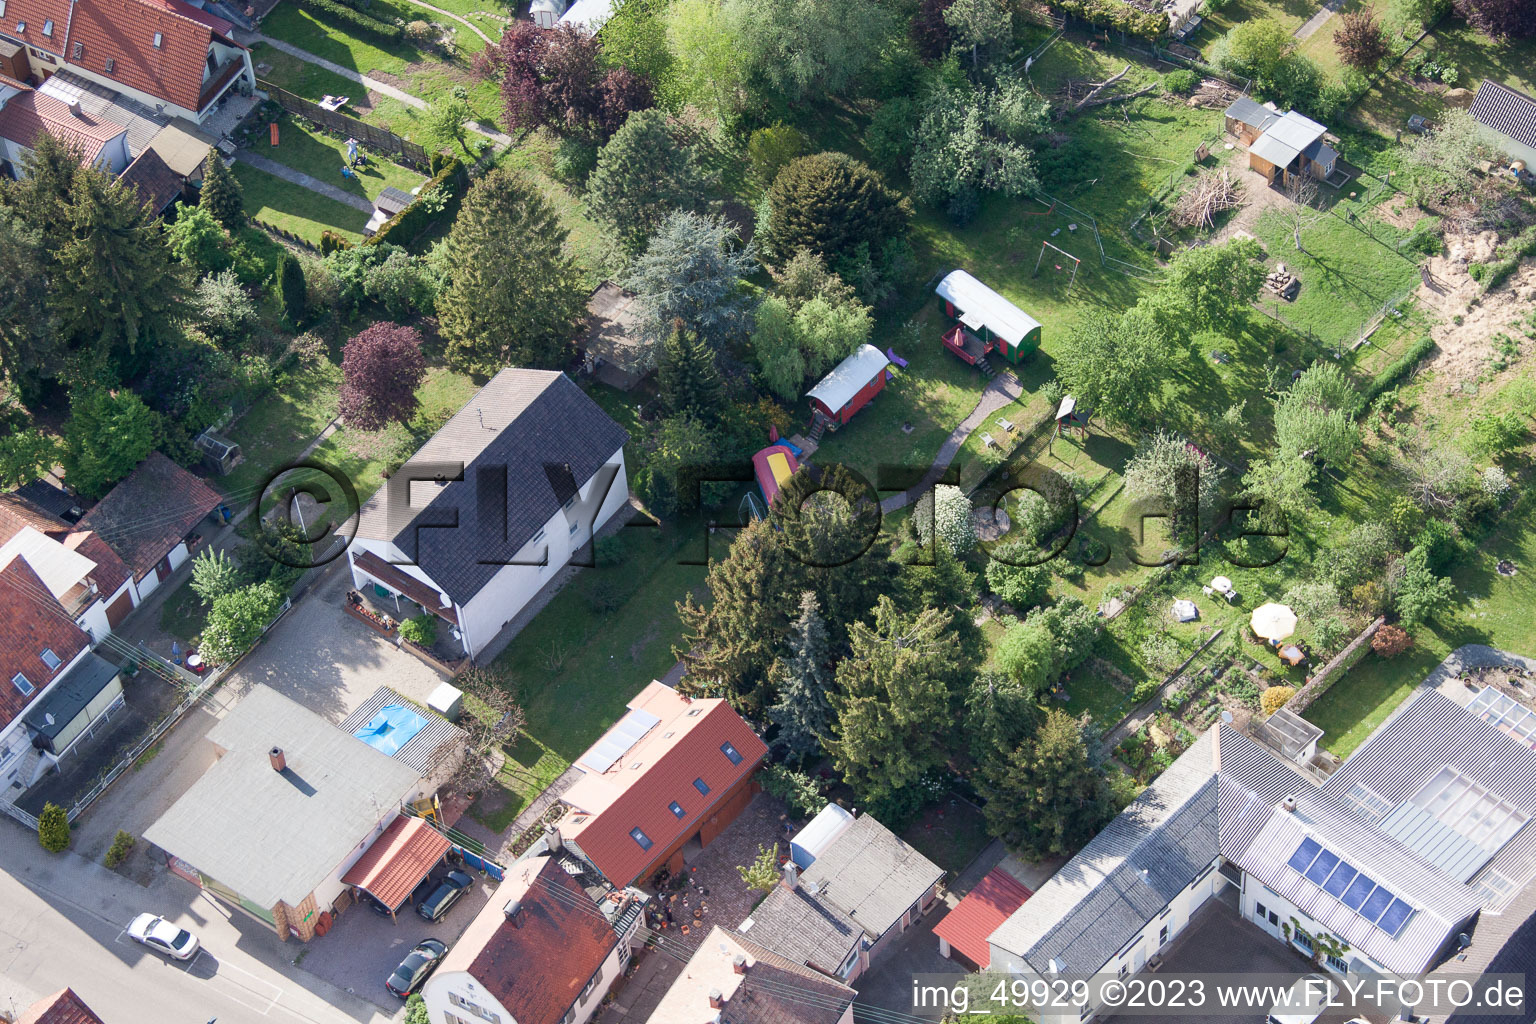 Saarstrasse Villa Kunterbunt in Kandel in the state Rhineland-Palatinate, Germany from the drone perspective